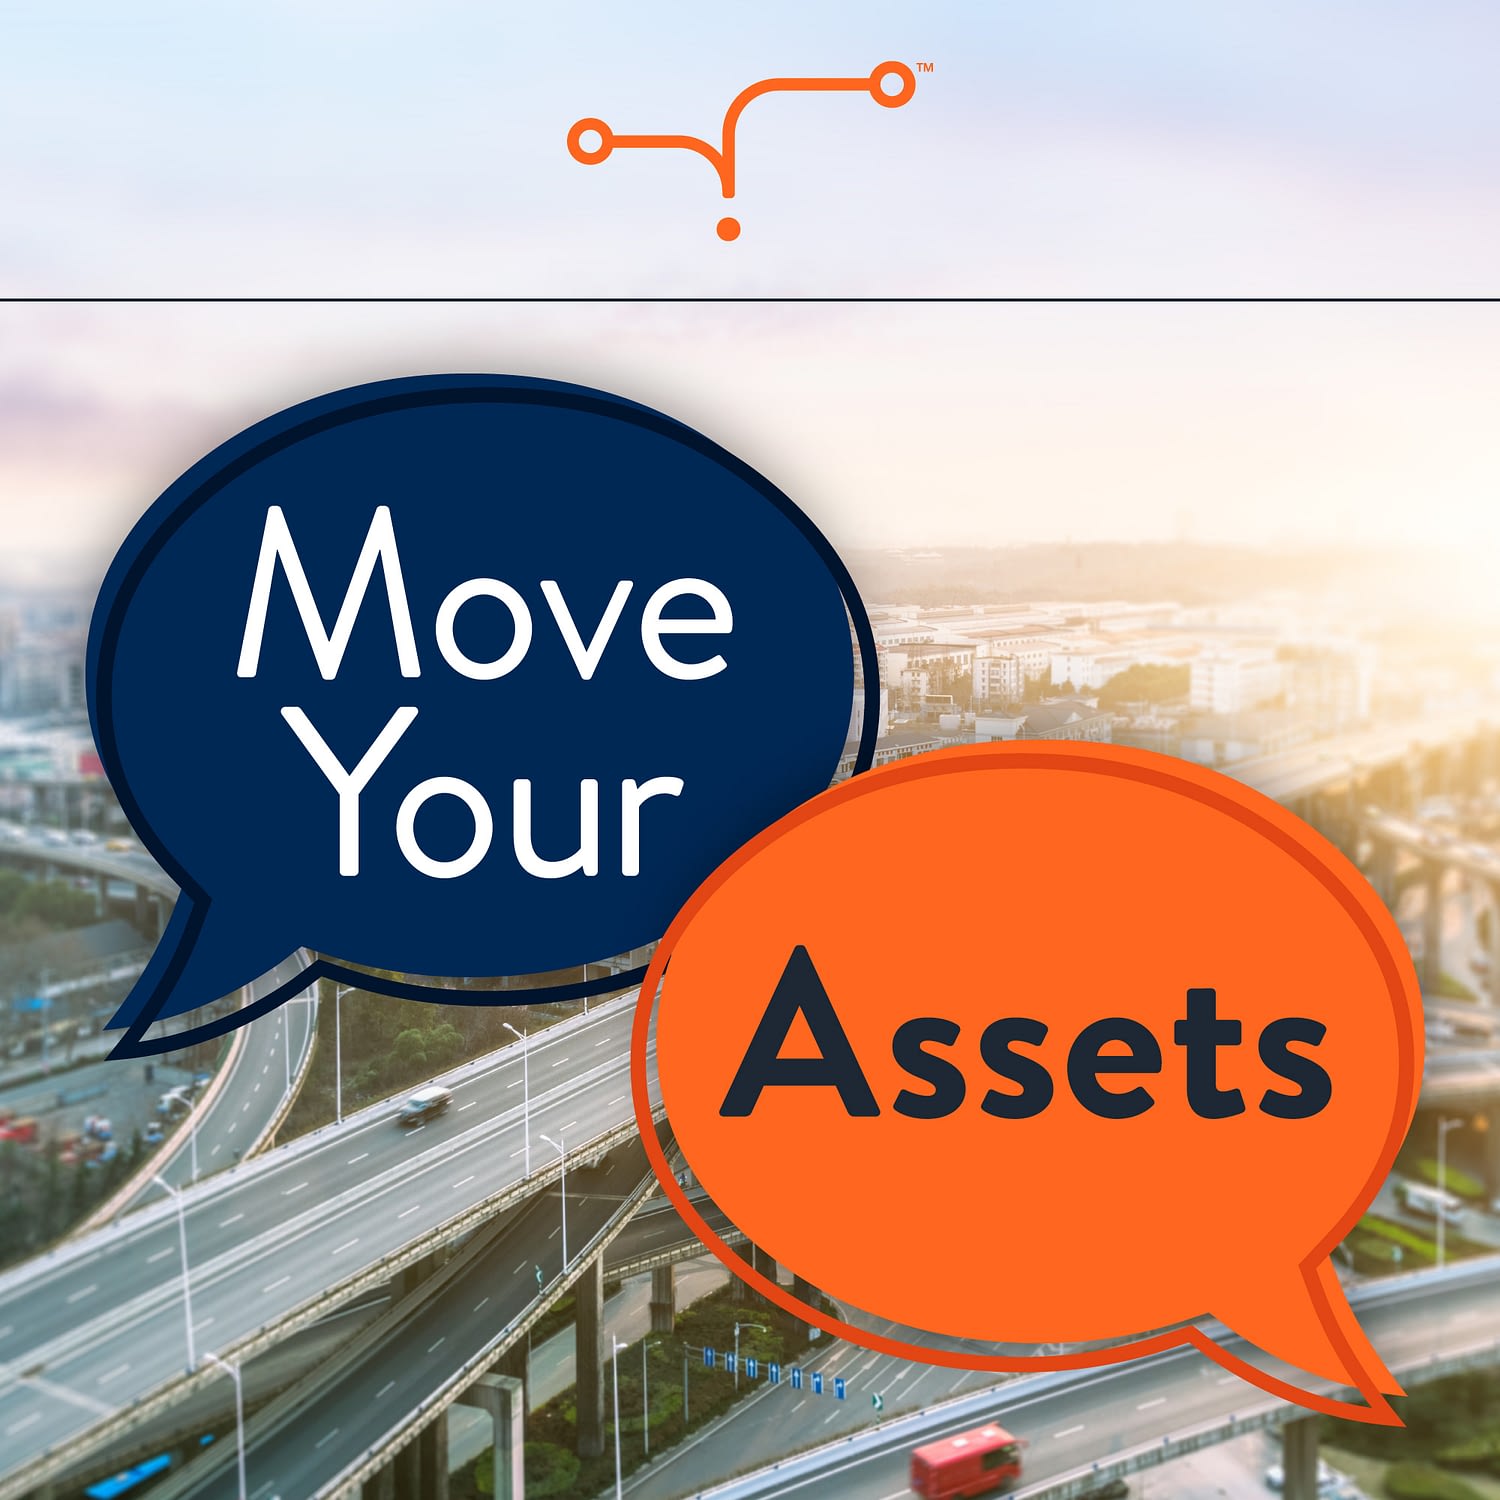 Move your Assets